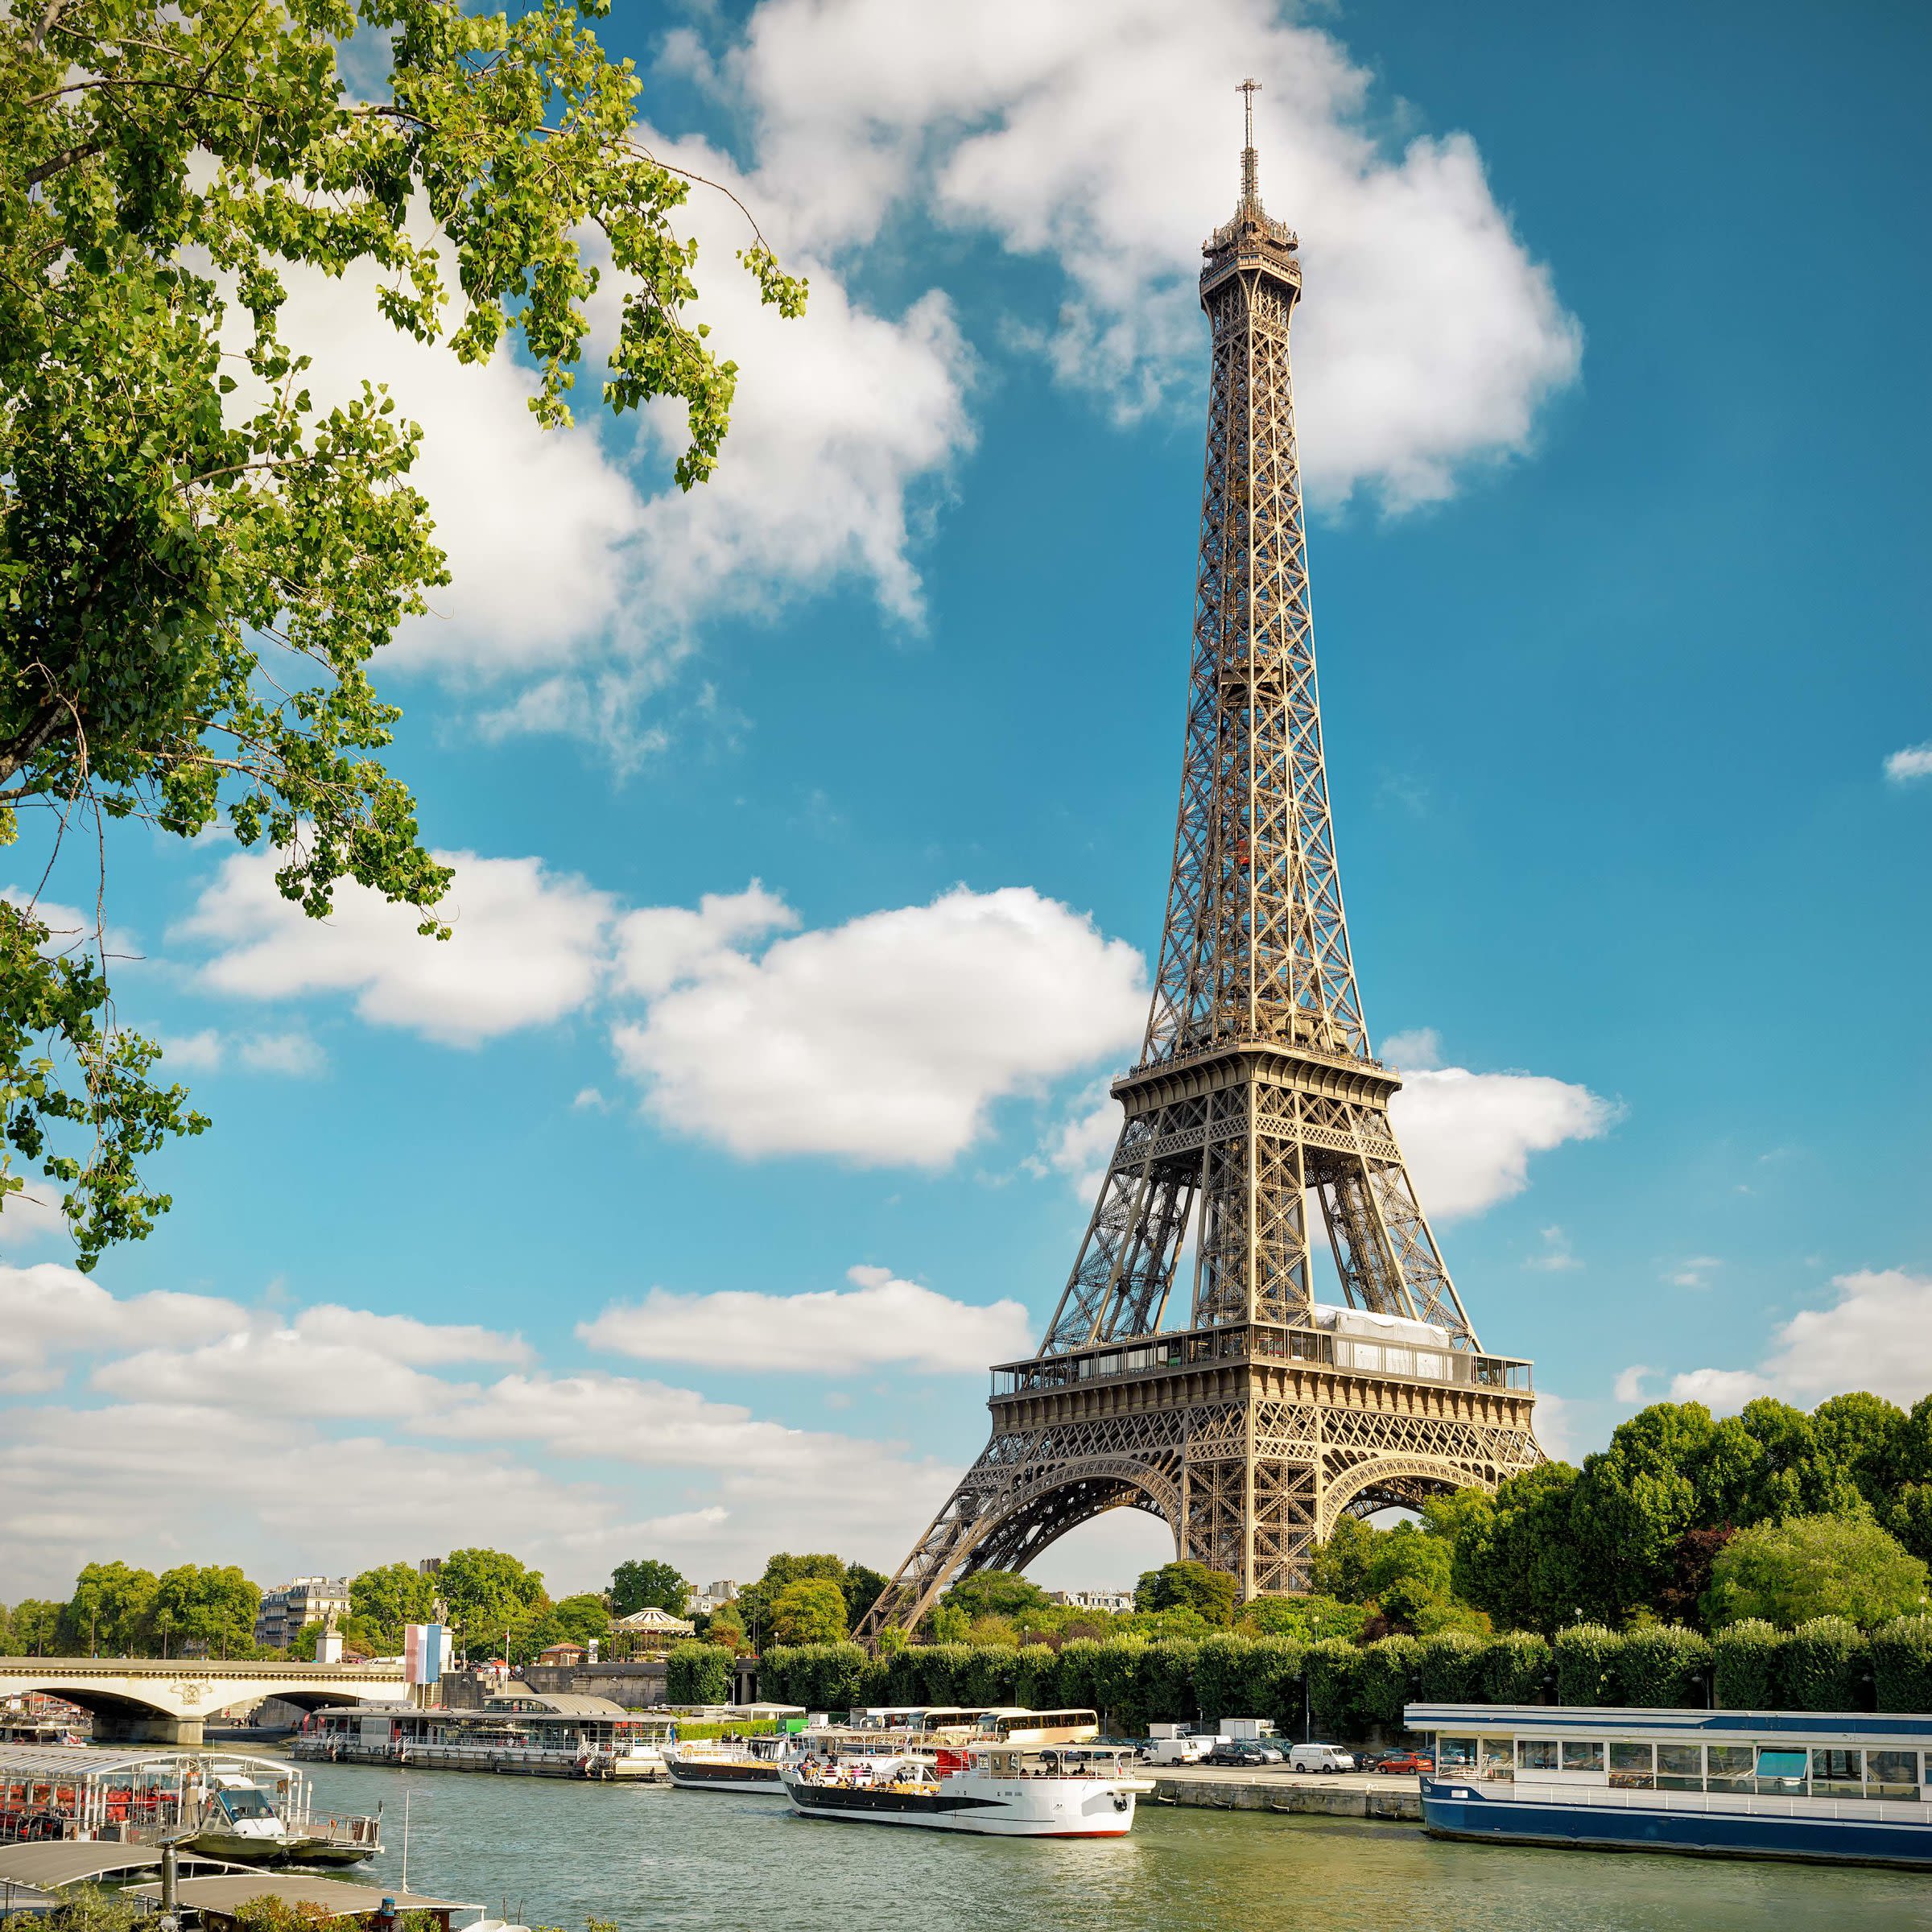 An outstanding 7 day France itinerary for explorers